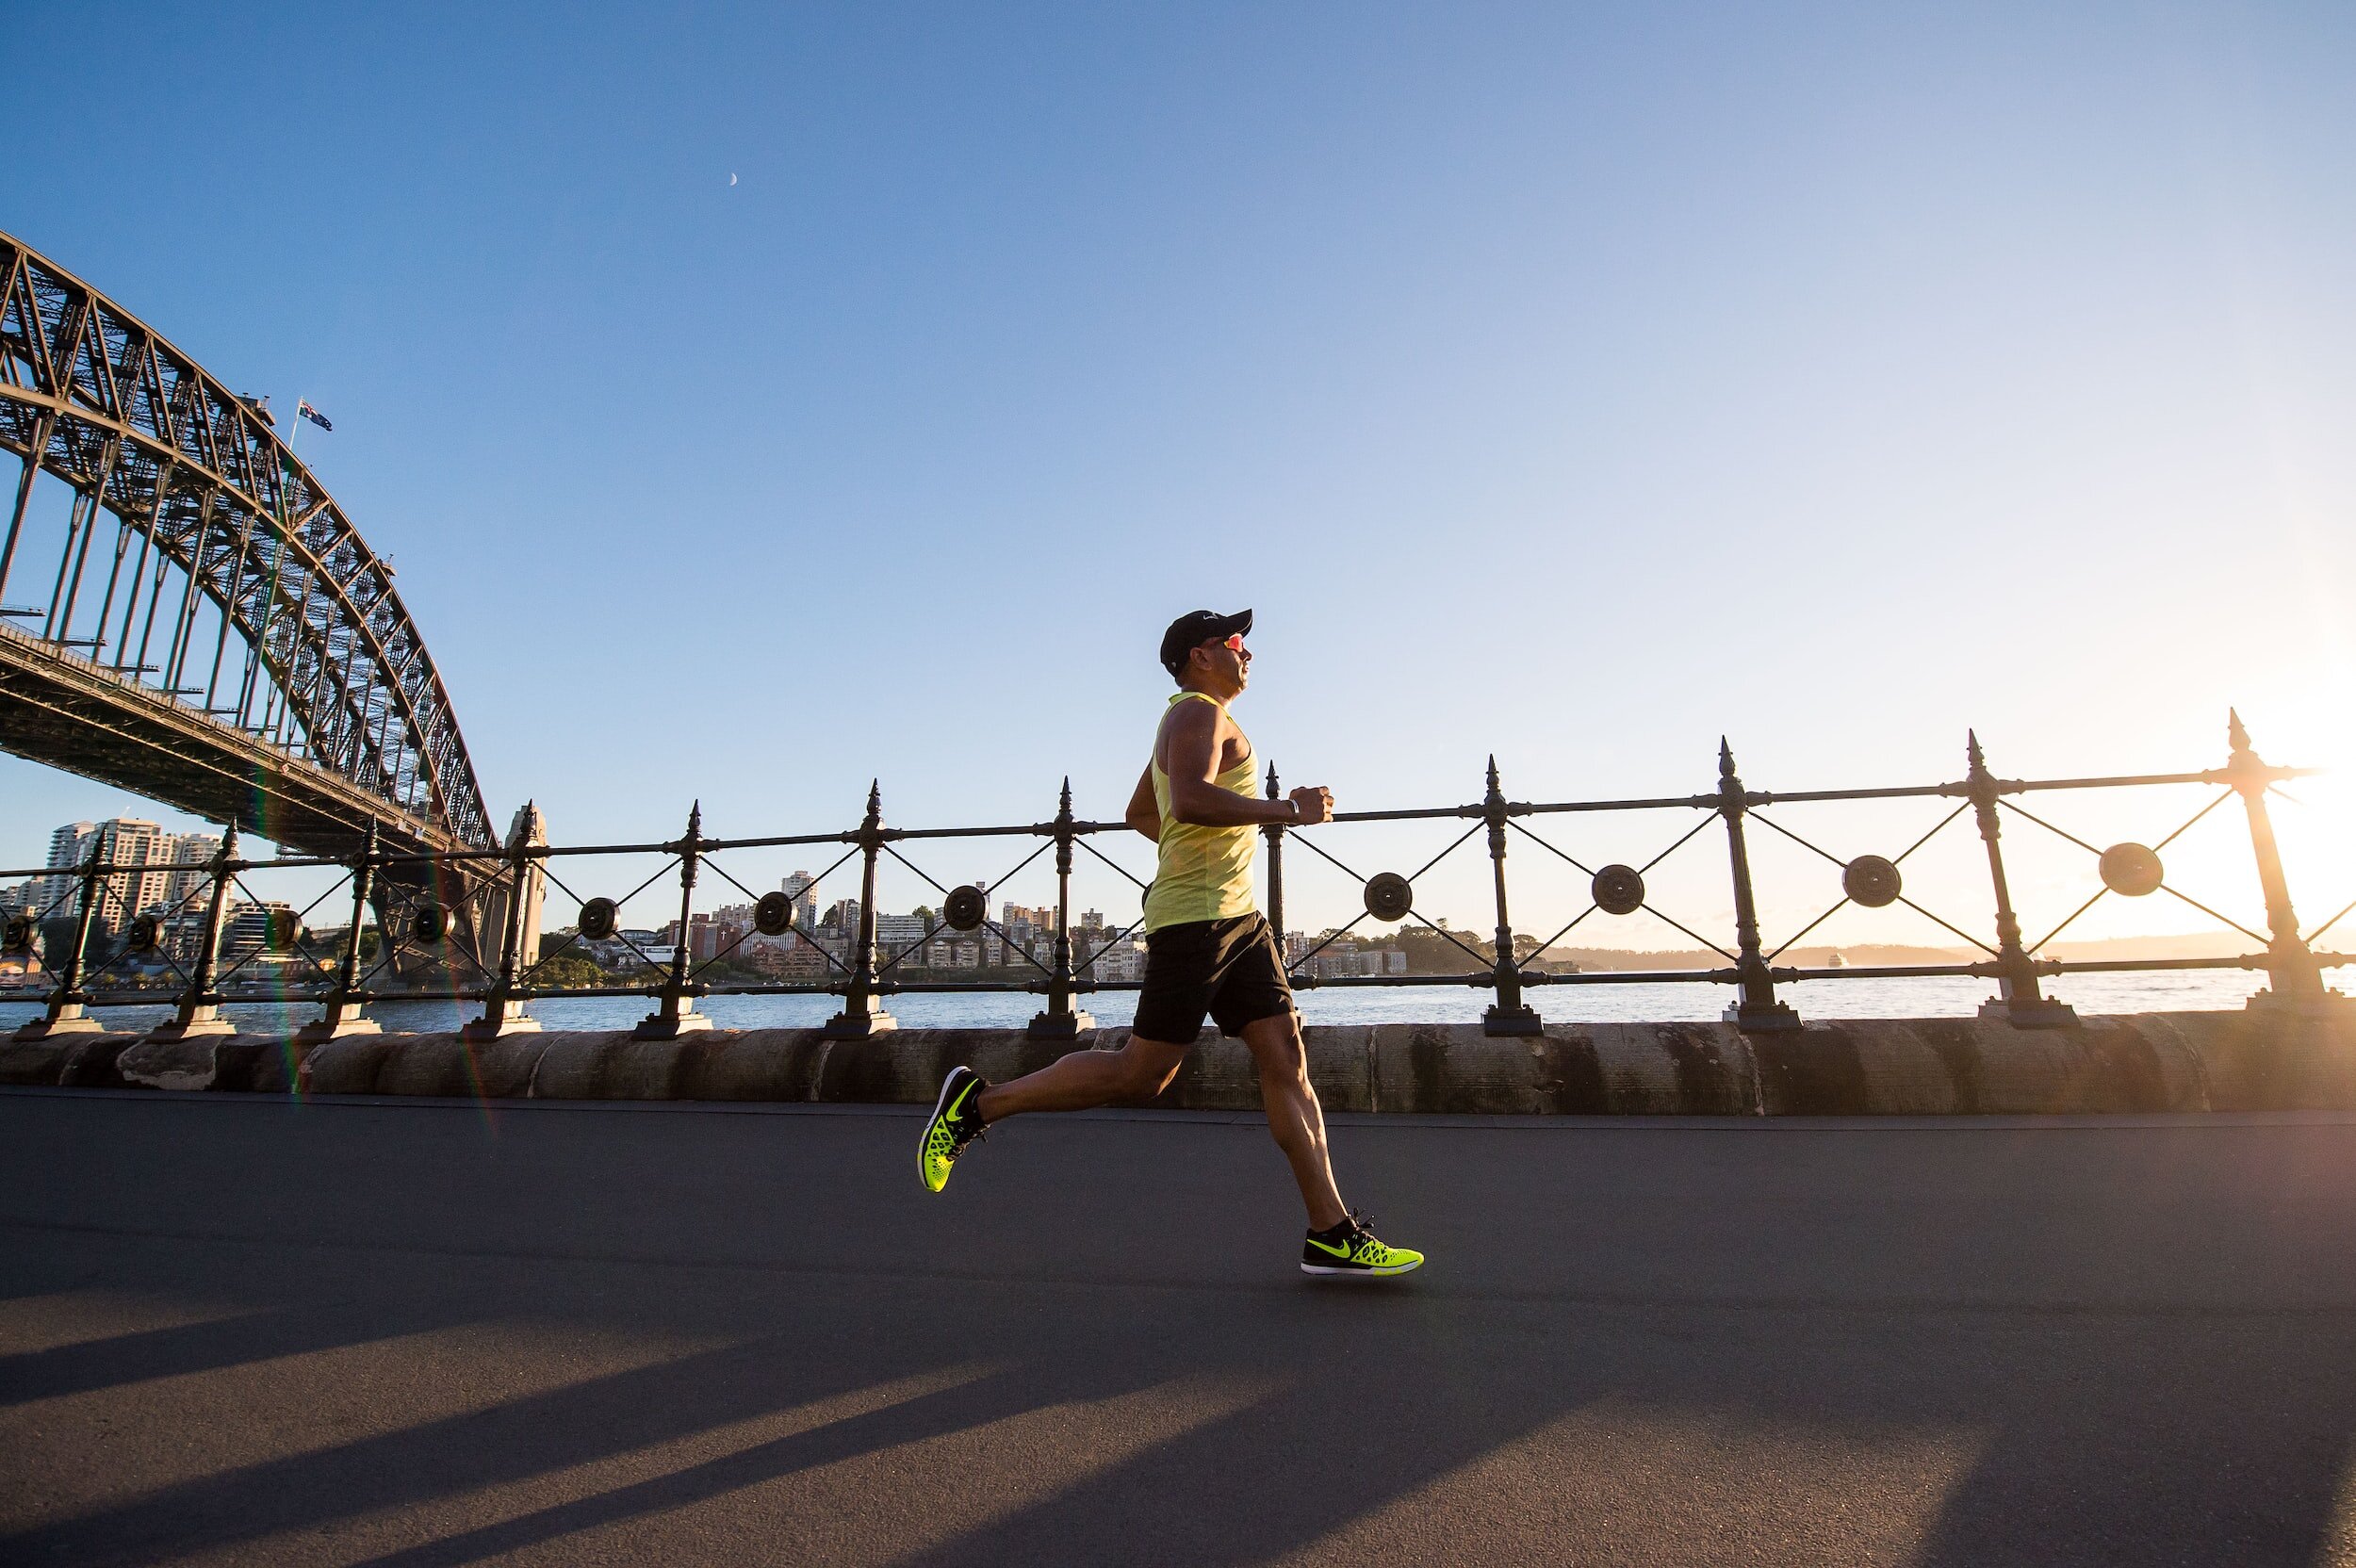 Runner's Day: alternatives to prevent injuries while training